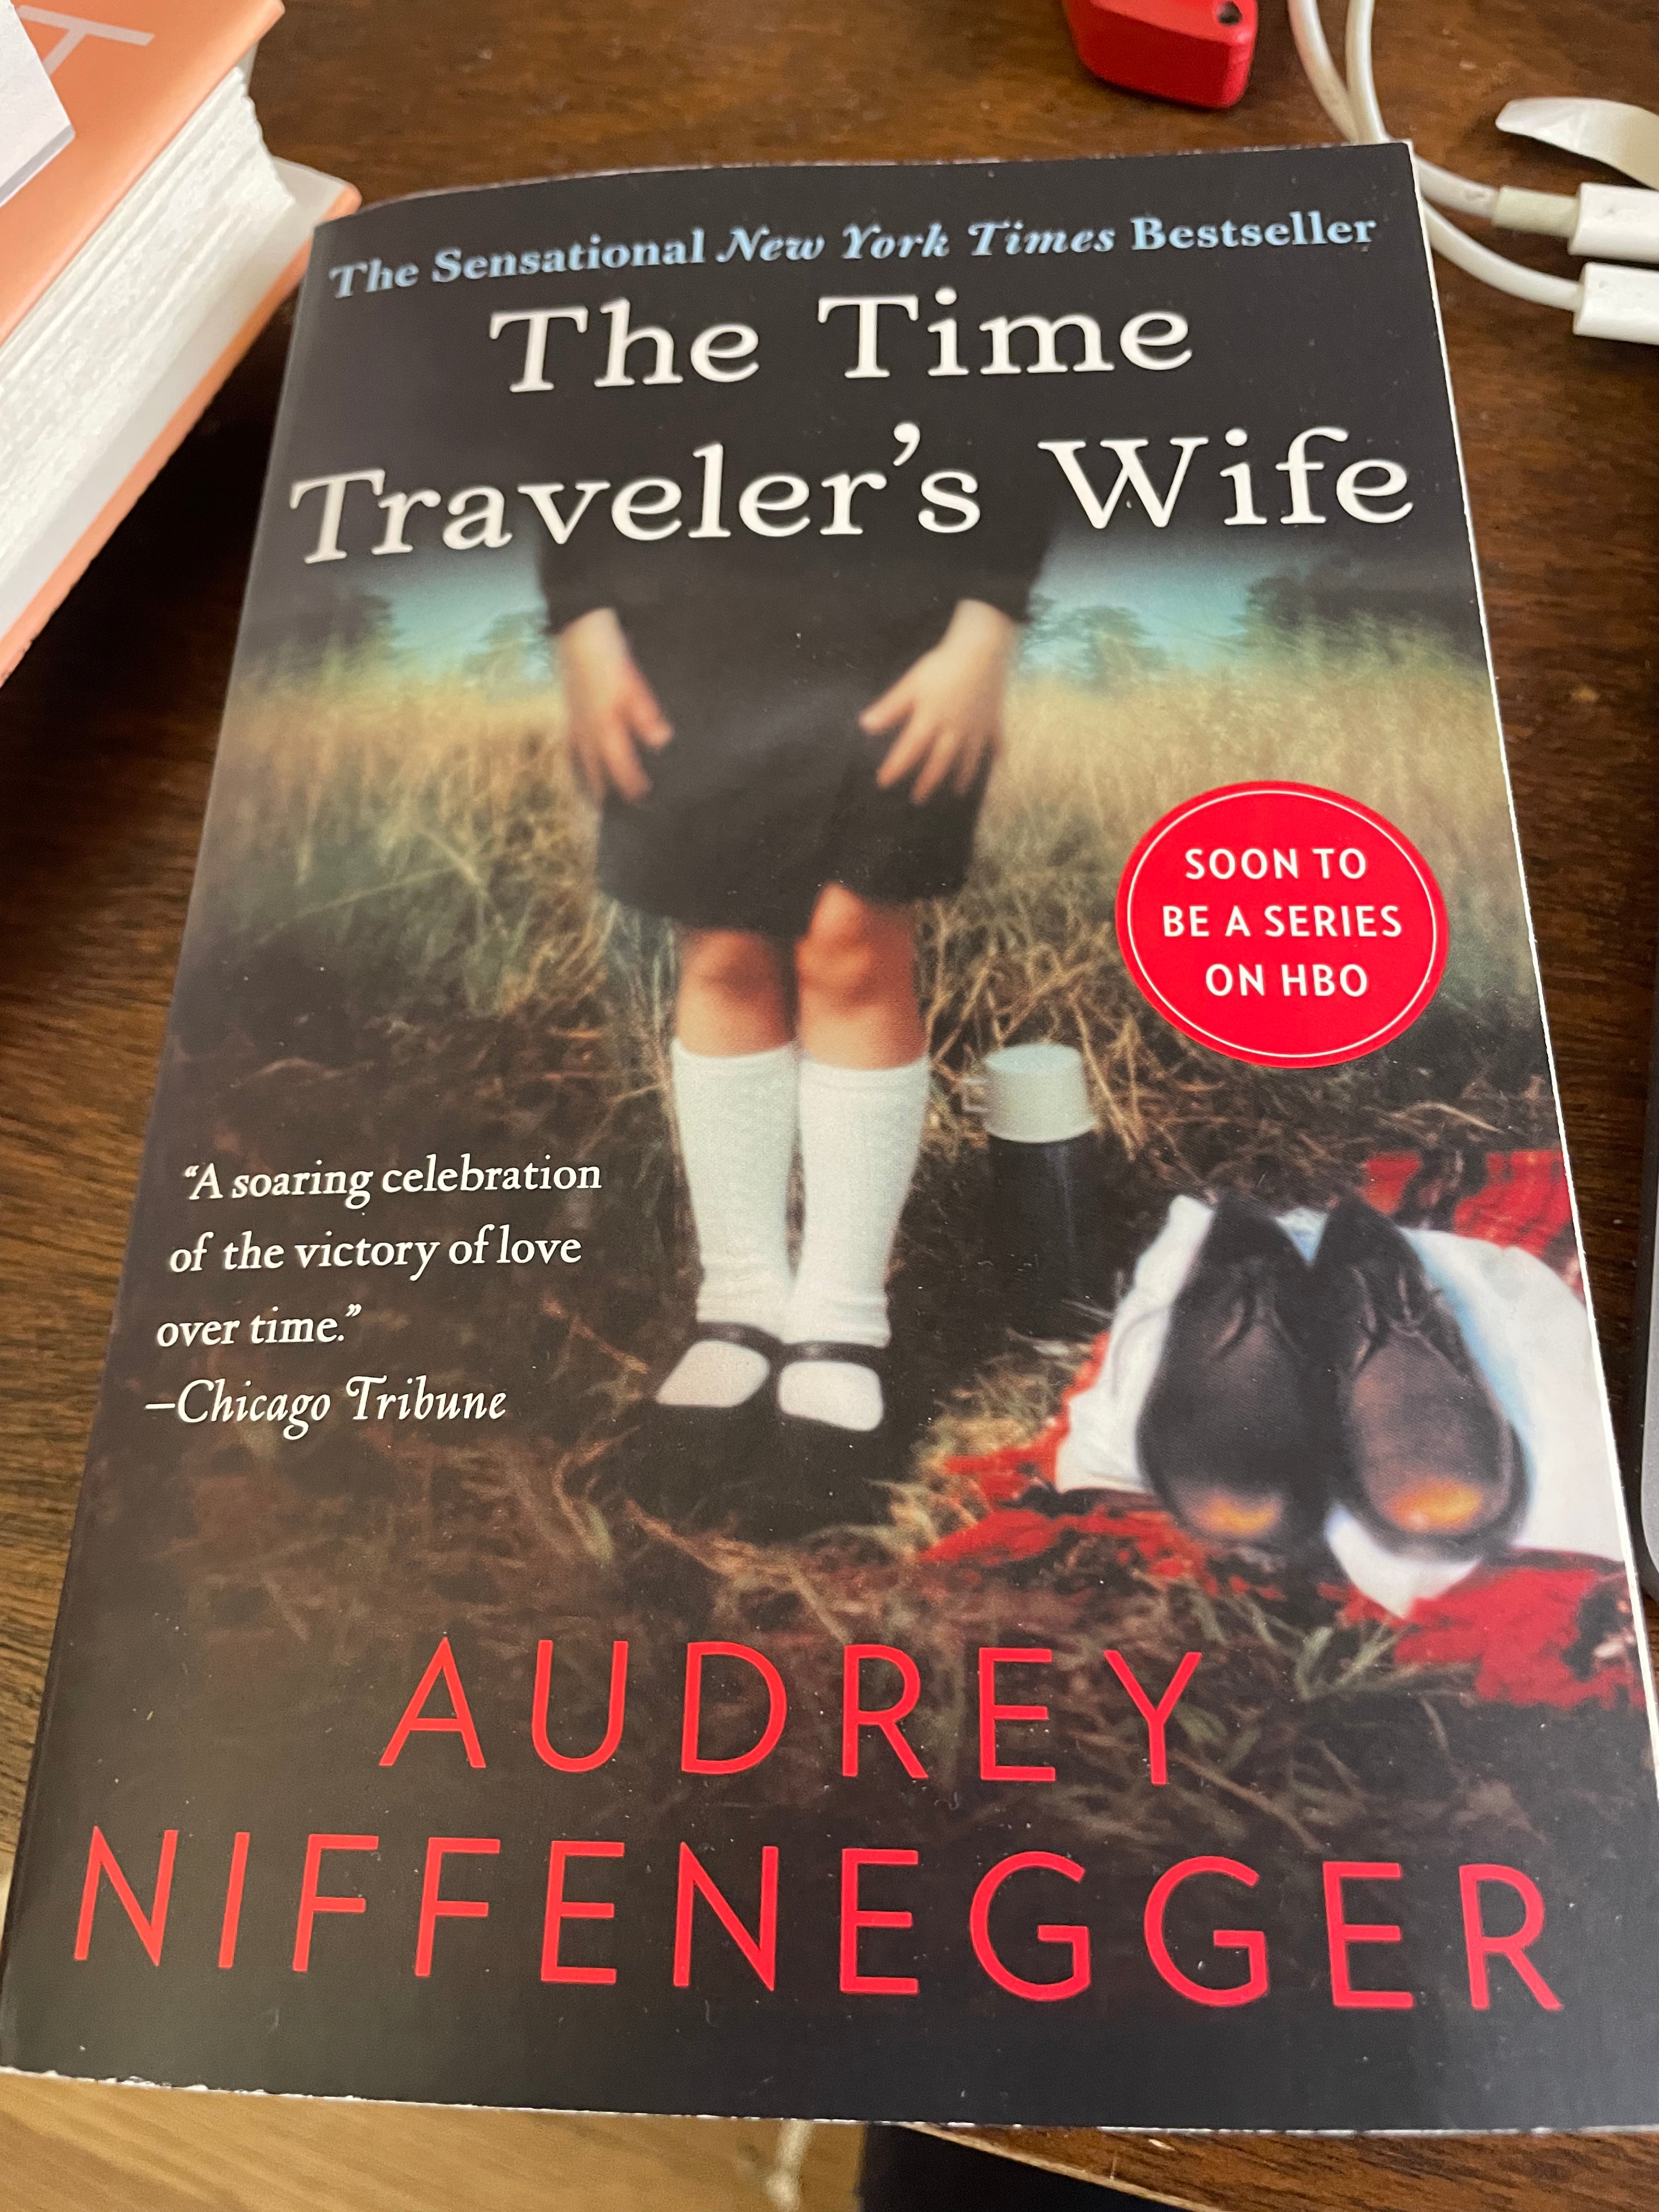 Book Package: The Time Traveler's Wife